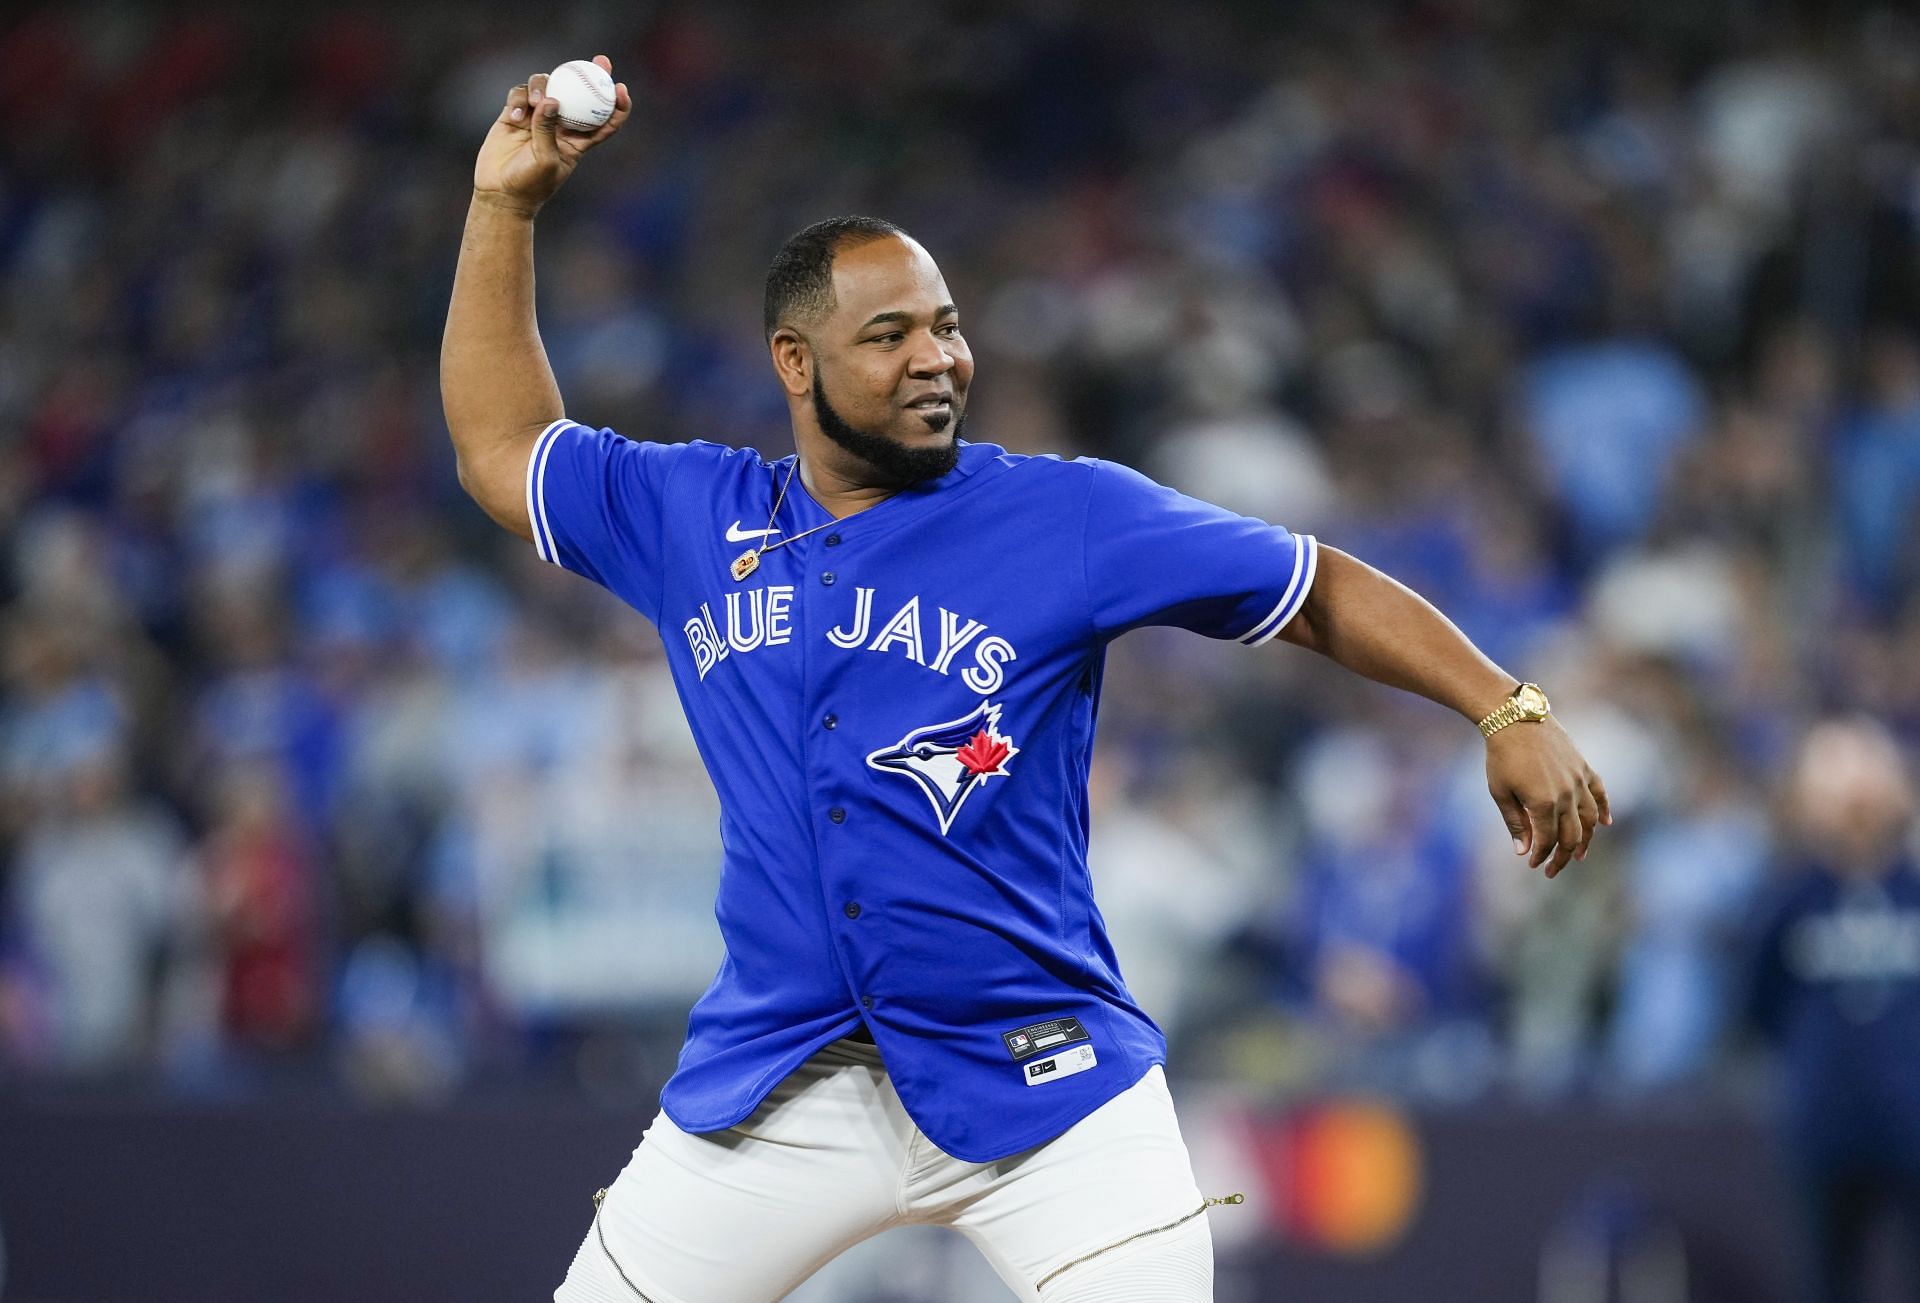 Do early Blue Jays moves mean exit of Edwin Encarnacion, Jose